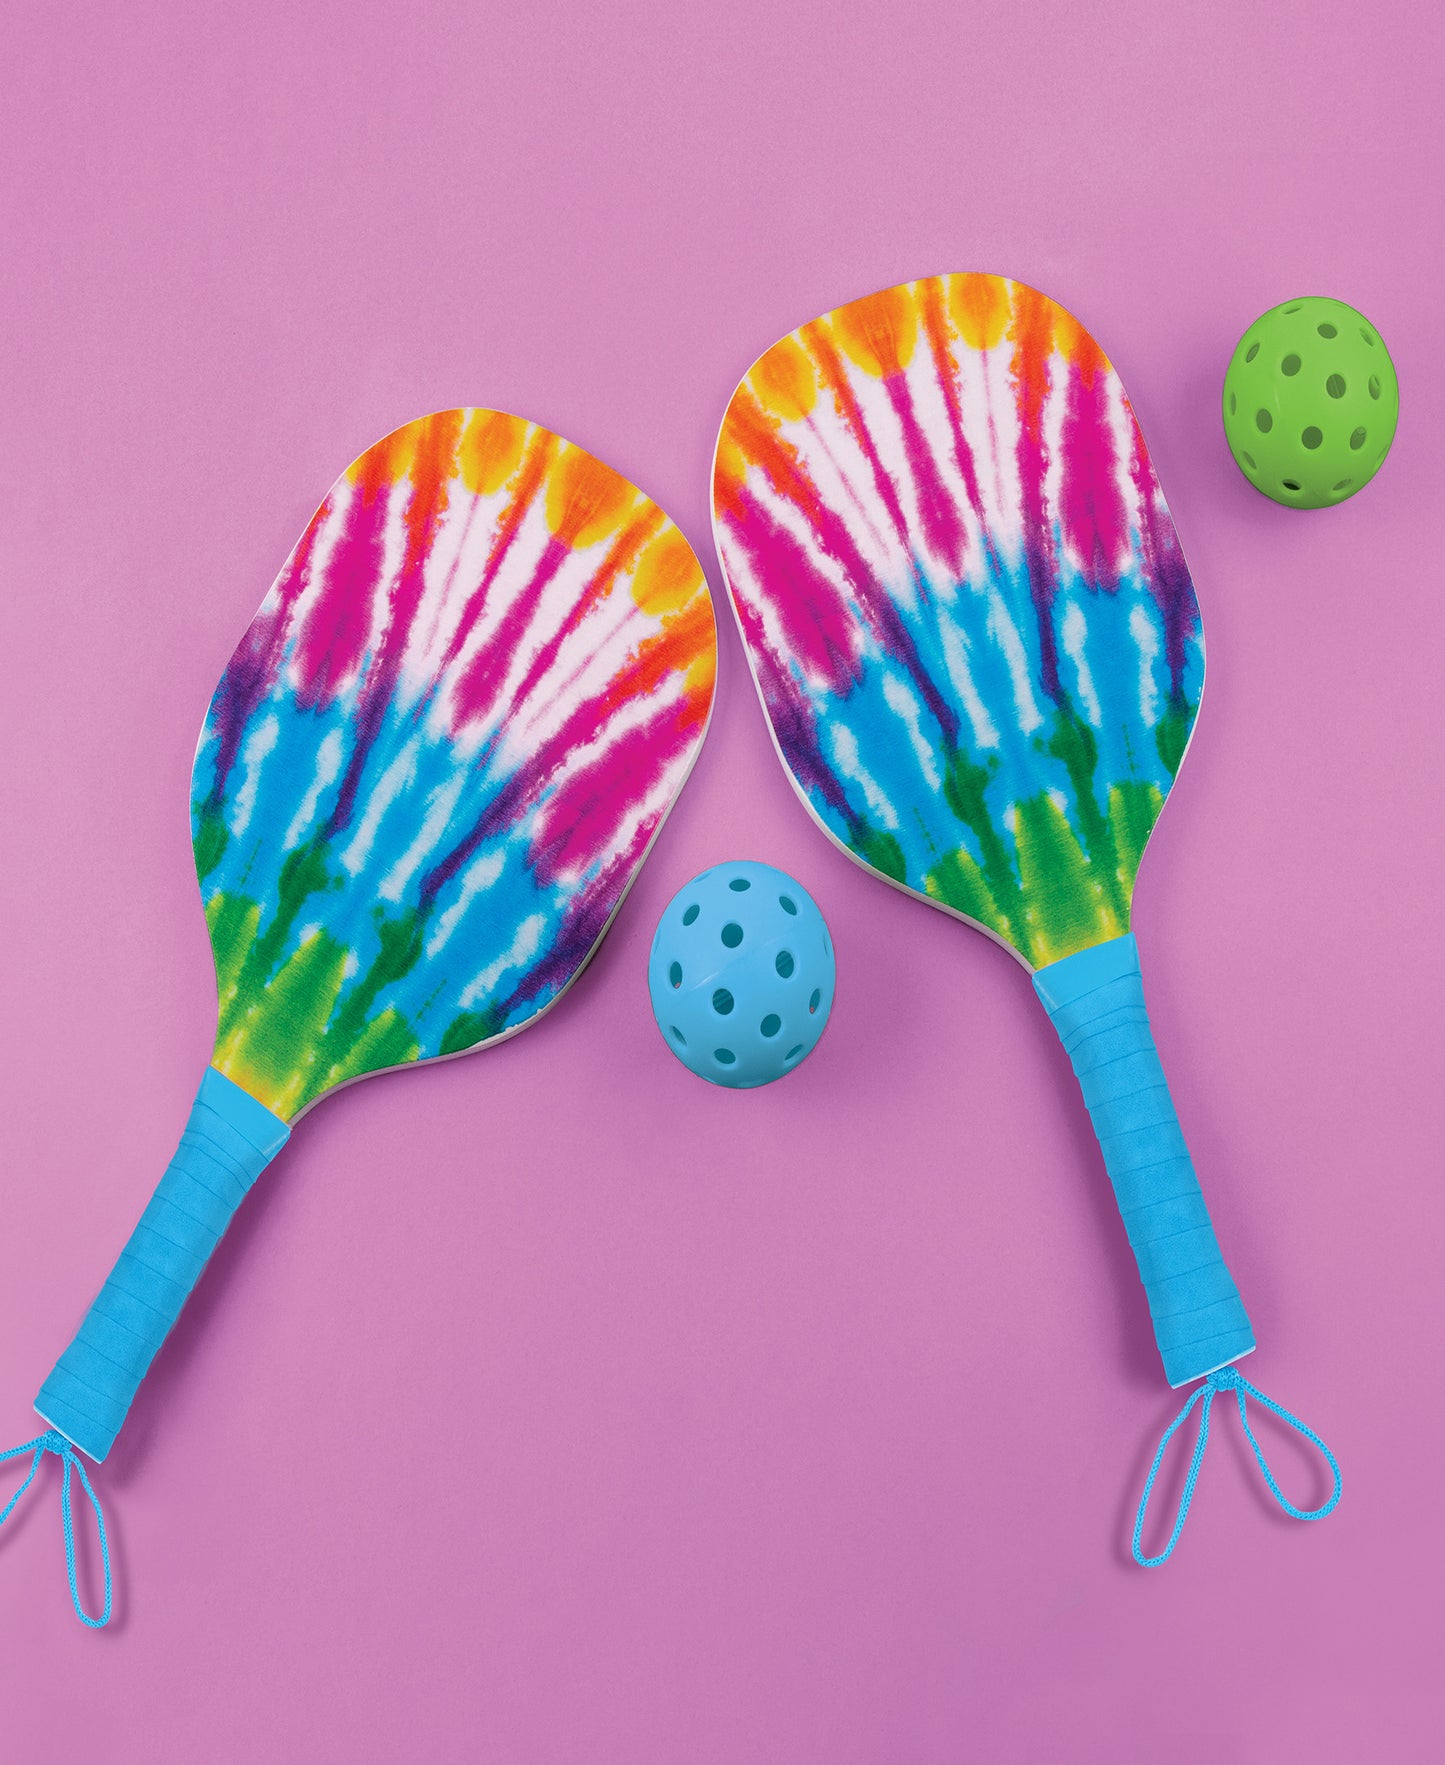 Three Cheers For Girls Vibrant Tie Dye Pickleball Set for Two